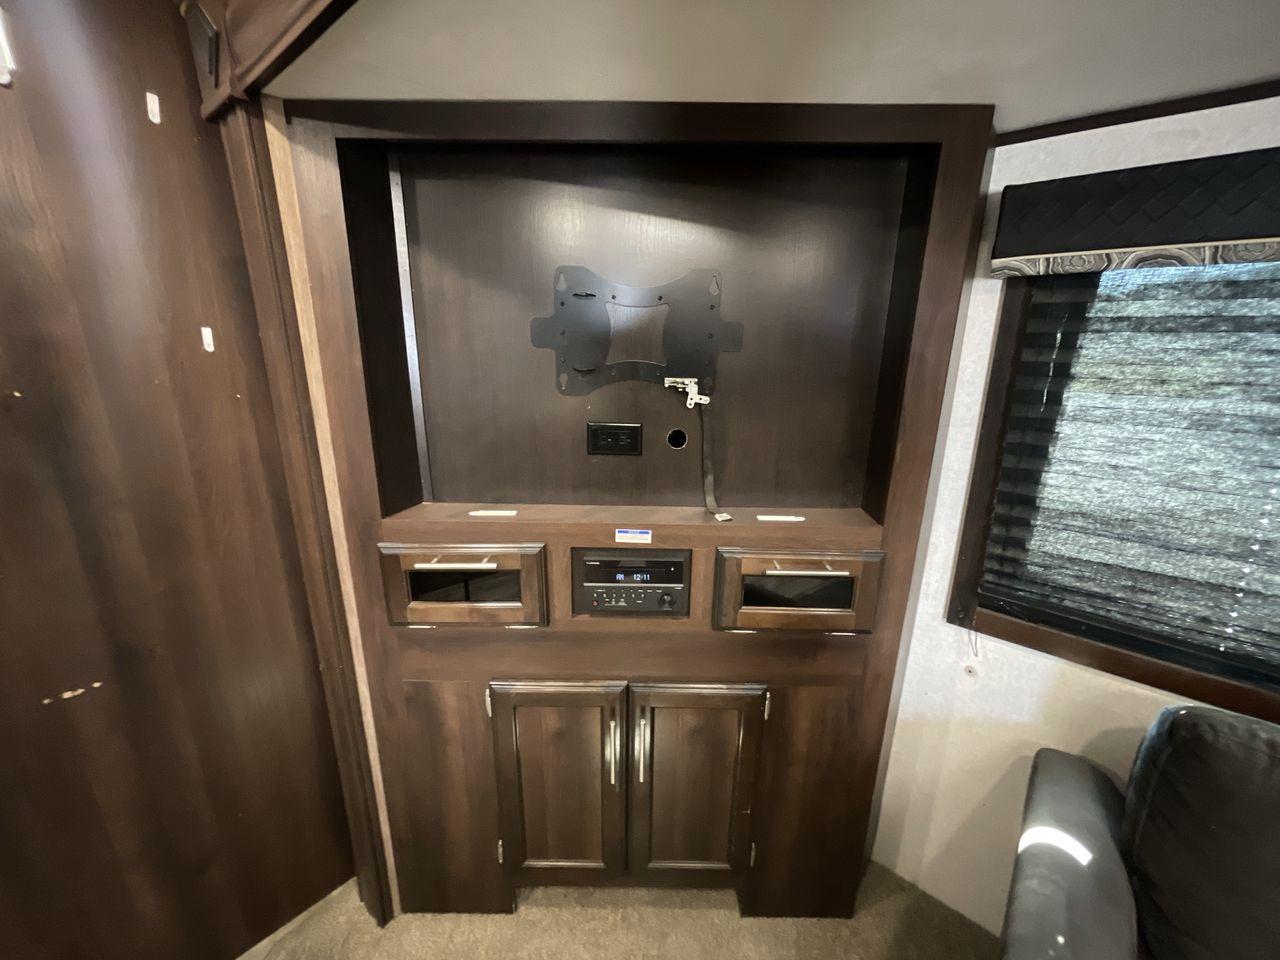 2018 WHITE JAYCO JAY FLIGHT 23MRB (1UJBJ0BN5J1) , Length: 28.17 ft | Dry Weight: 5,560 lbs. | Gross Weight: 7,250 lbs. | Slides: 1 transmission, located at 4319 N Main Street, Cleburne, TX, 76033, (817) 221-0660, 32.435829, -97.384178 - The 2018 Jayco Jay Flight 23MRB is a travel trailer that encapsulates both compactness and luxury for unparalleled camping experiences. Spanning 28 feet in length, this model boasts a thoughtfully arranged interior featuring a single slide-out, seamlessly amplifying the living space. The Jay Flight - Photo #19